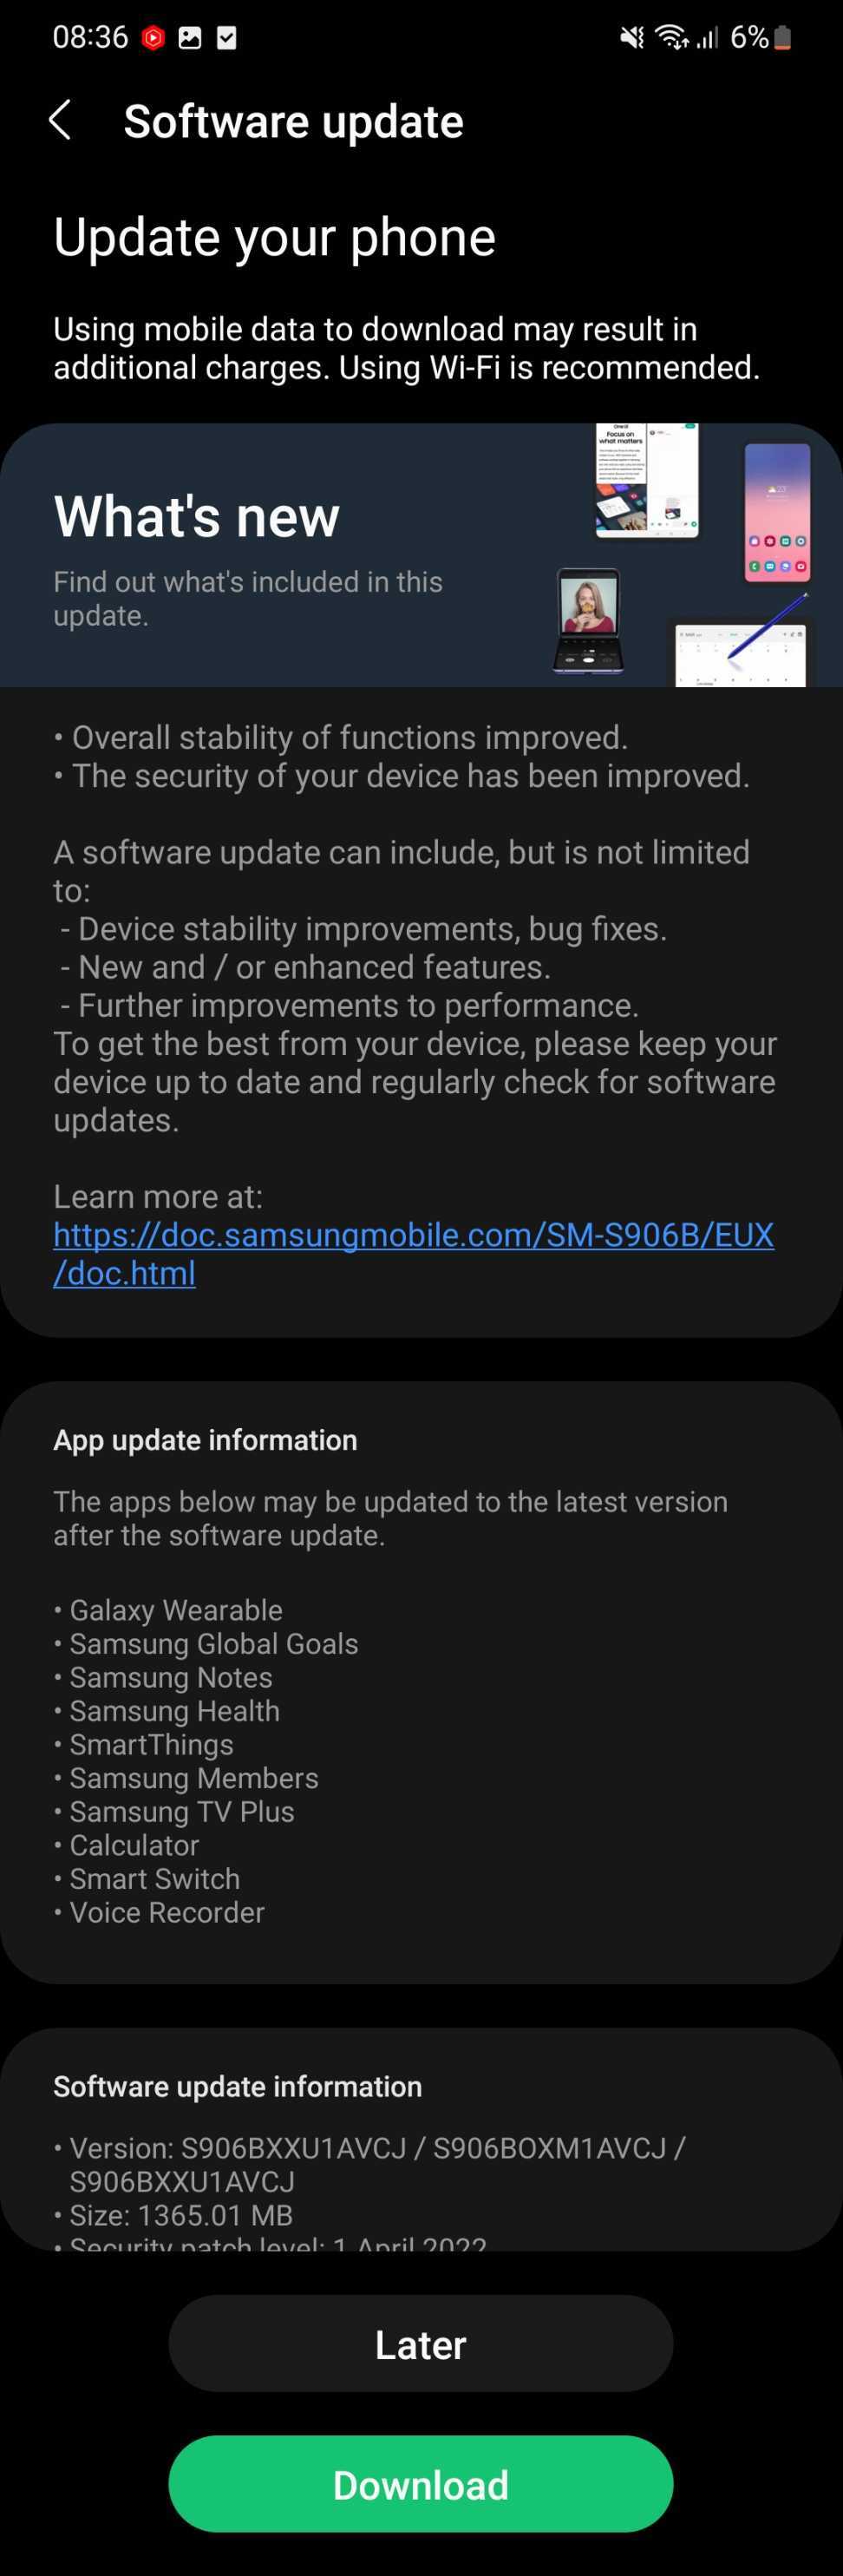 Samsung Galaxy S22+ April 2022 patch update notes